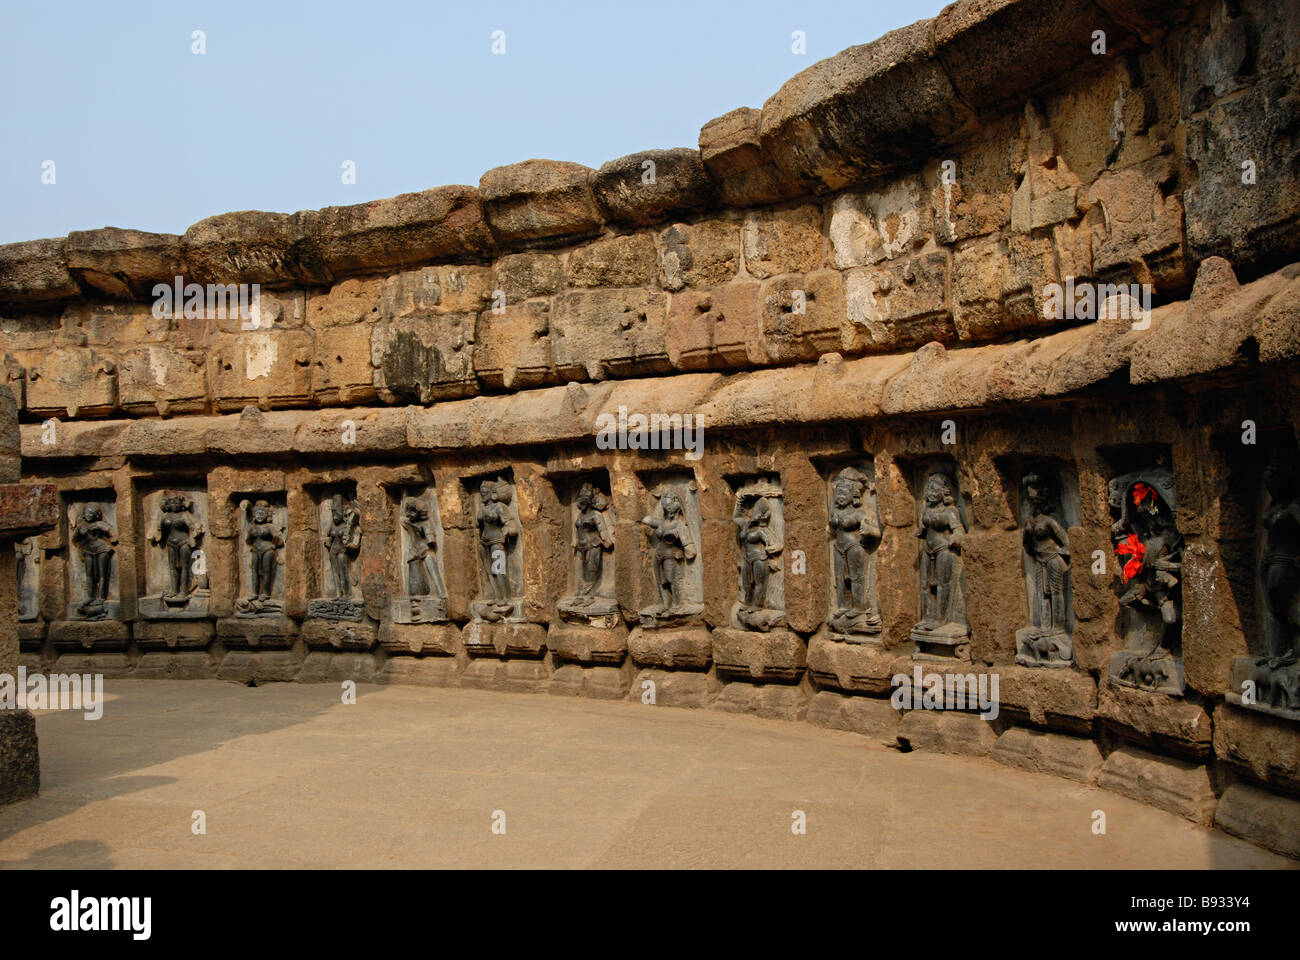 Yogini Temple, General-View of the temple showing viewer's right portion, few Yogini figures are visible. Hirapur, Orissa, India Stock Photo